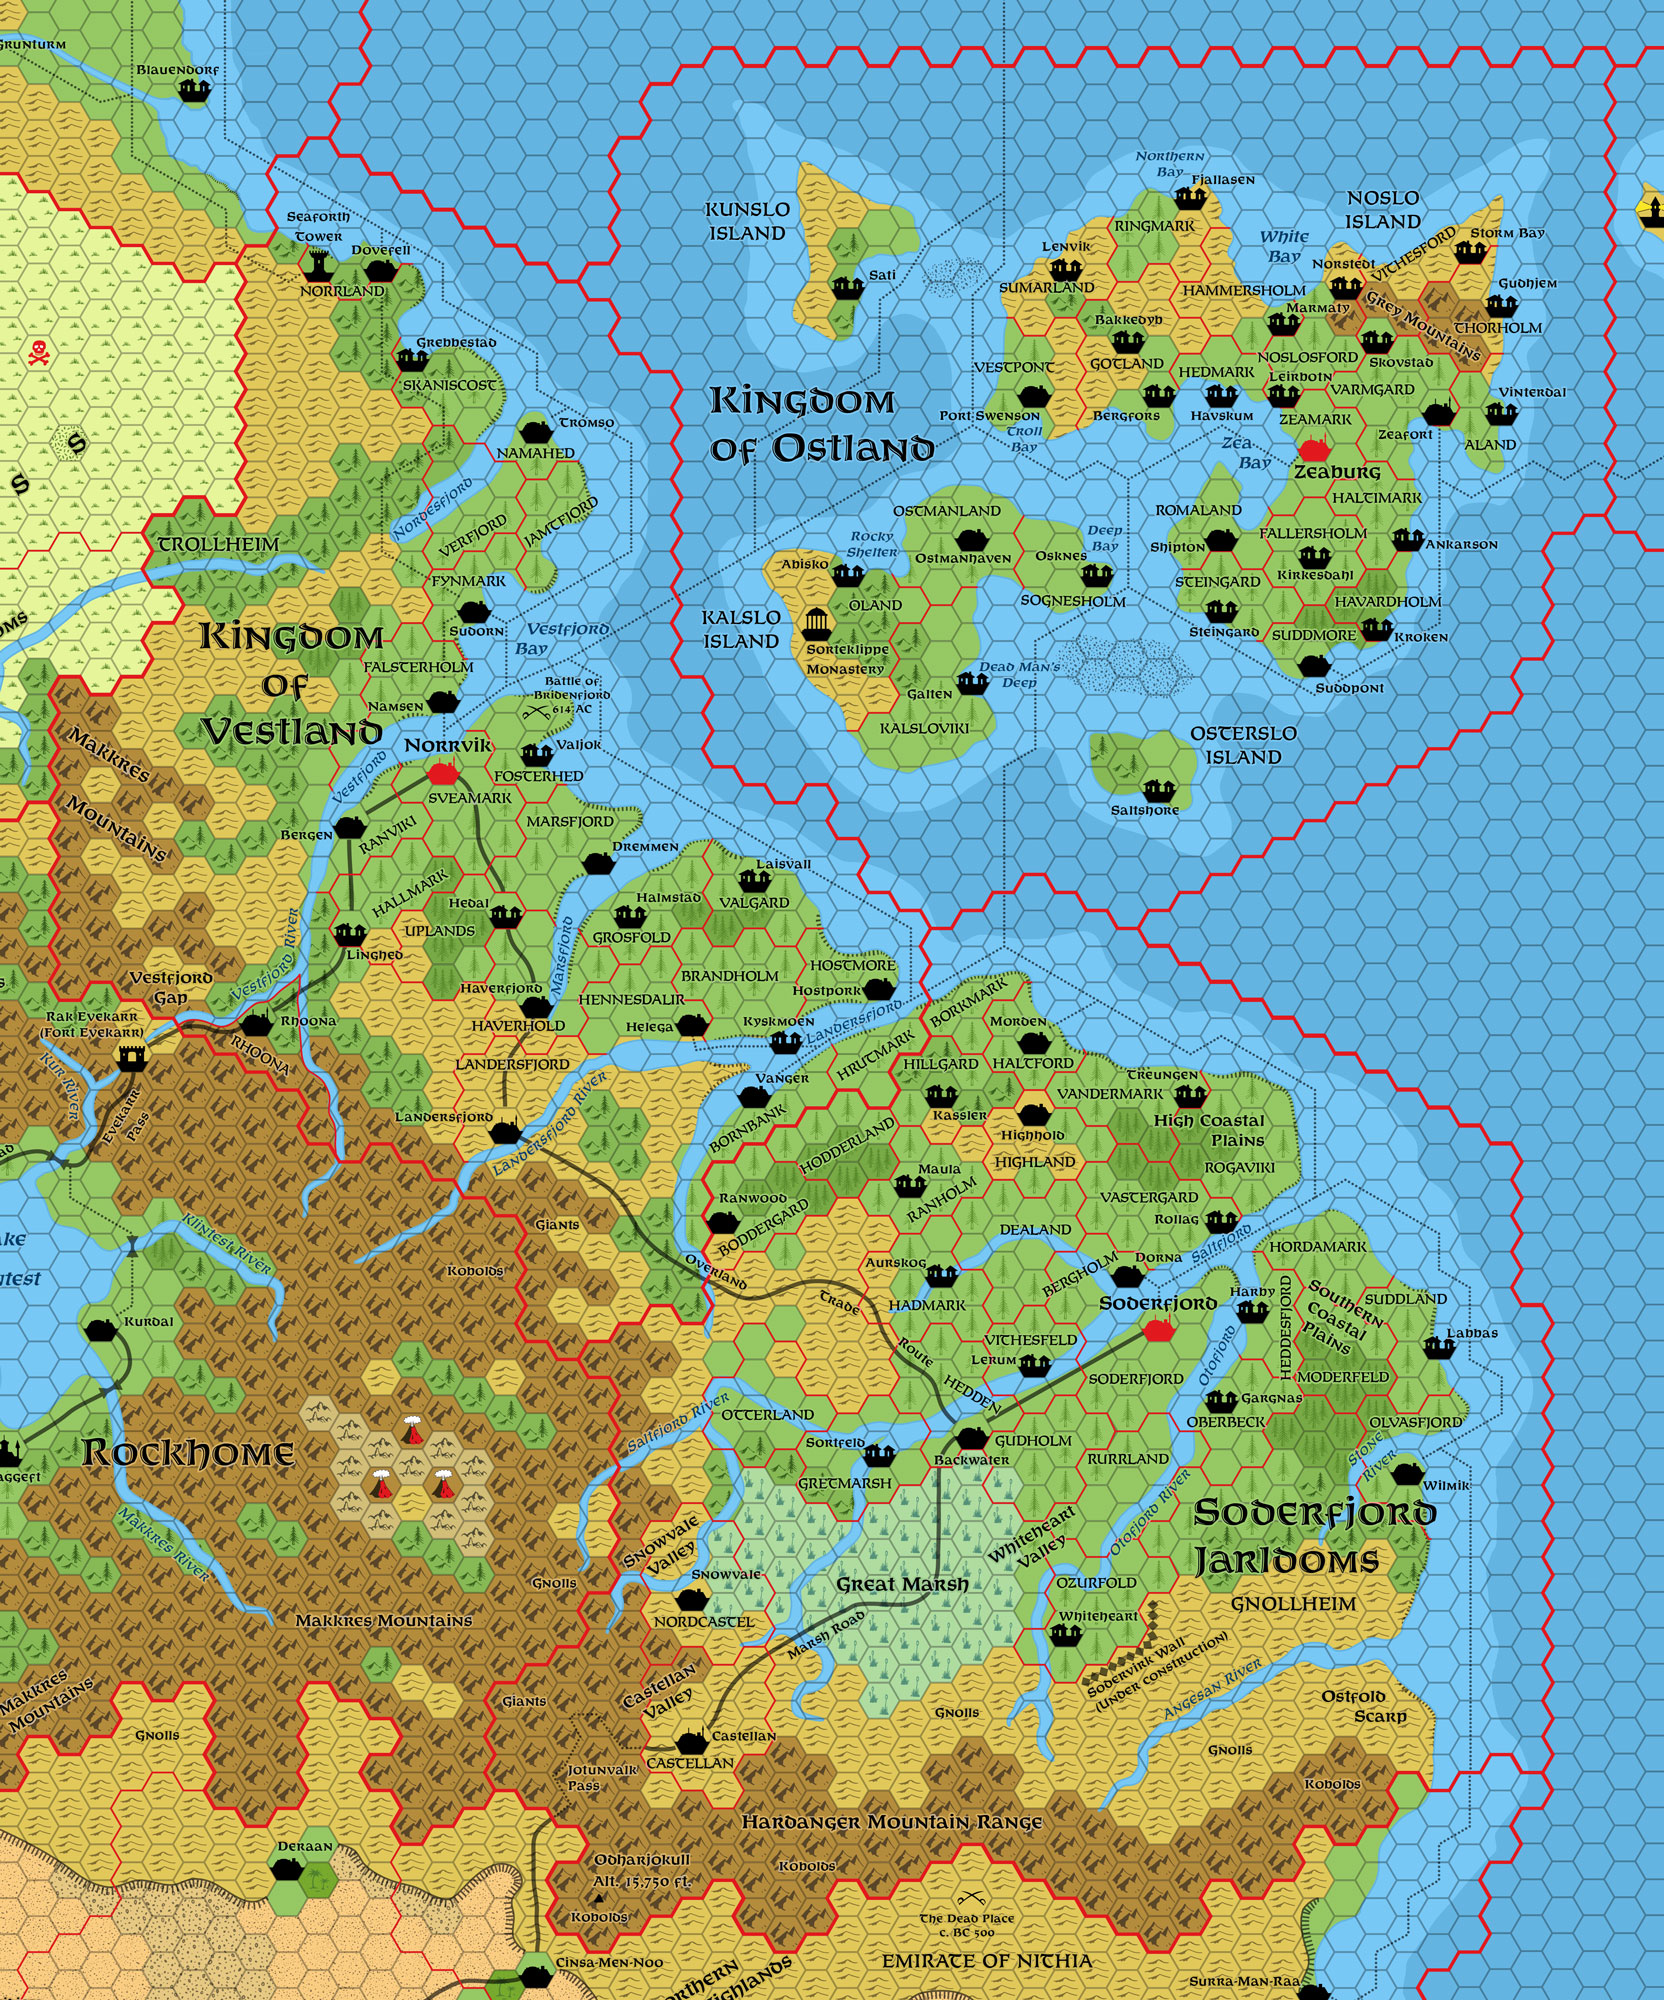 Northern Reaches, 8 miles per hex